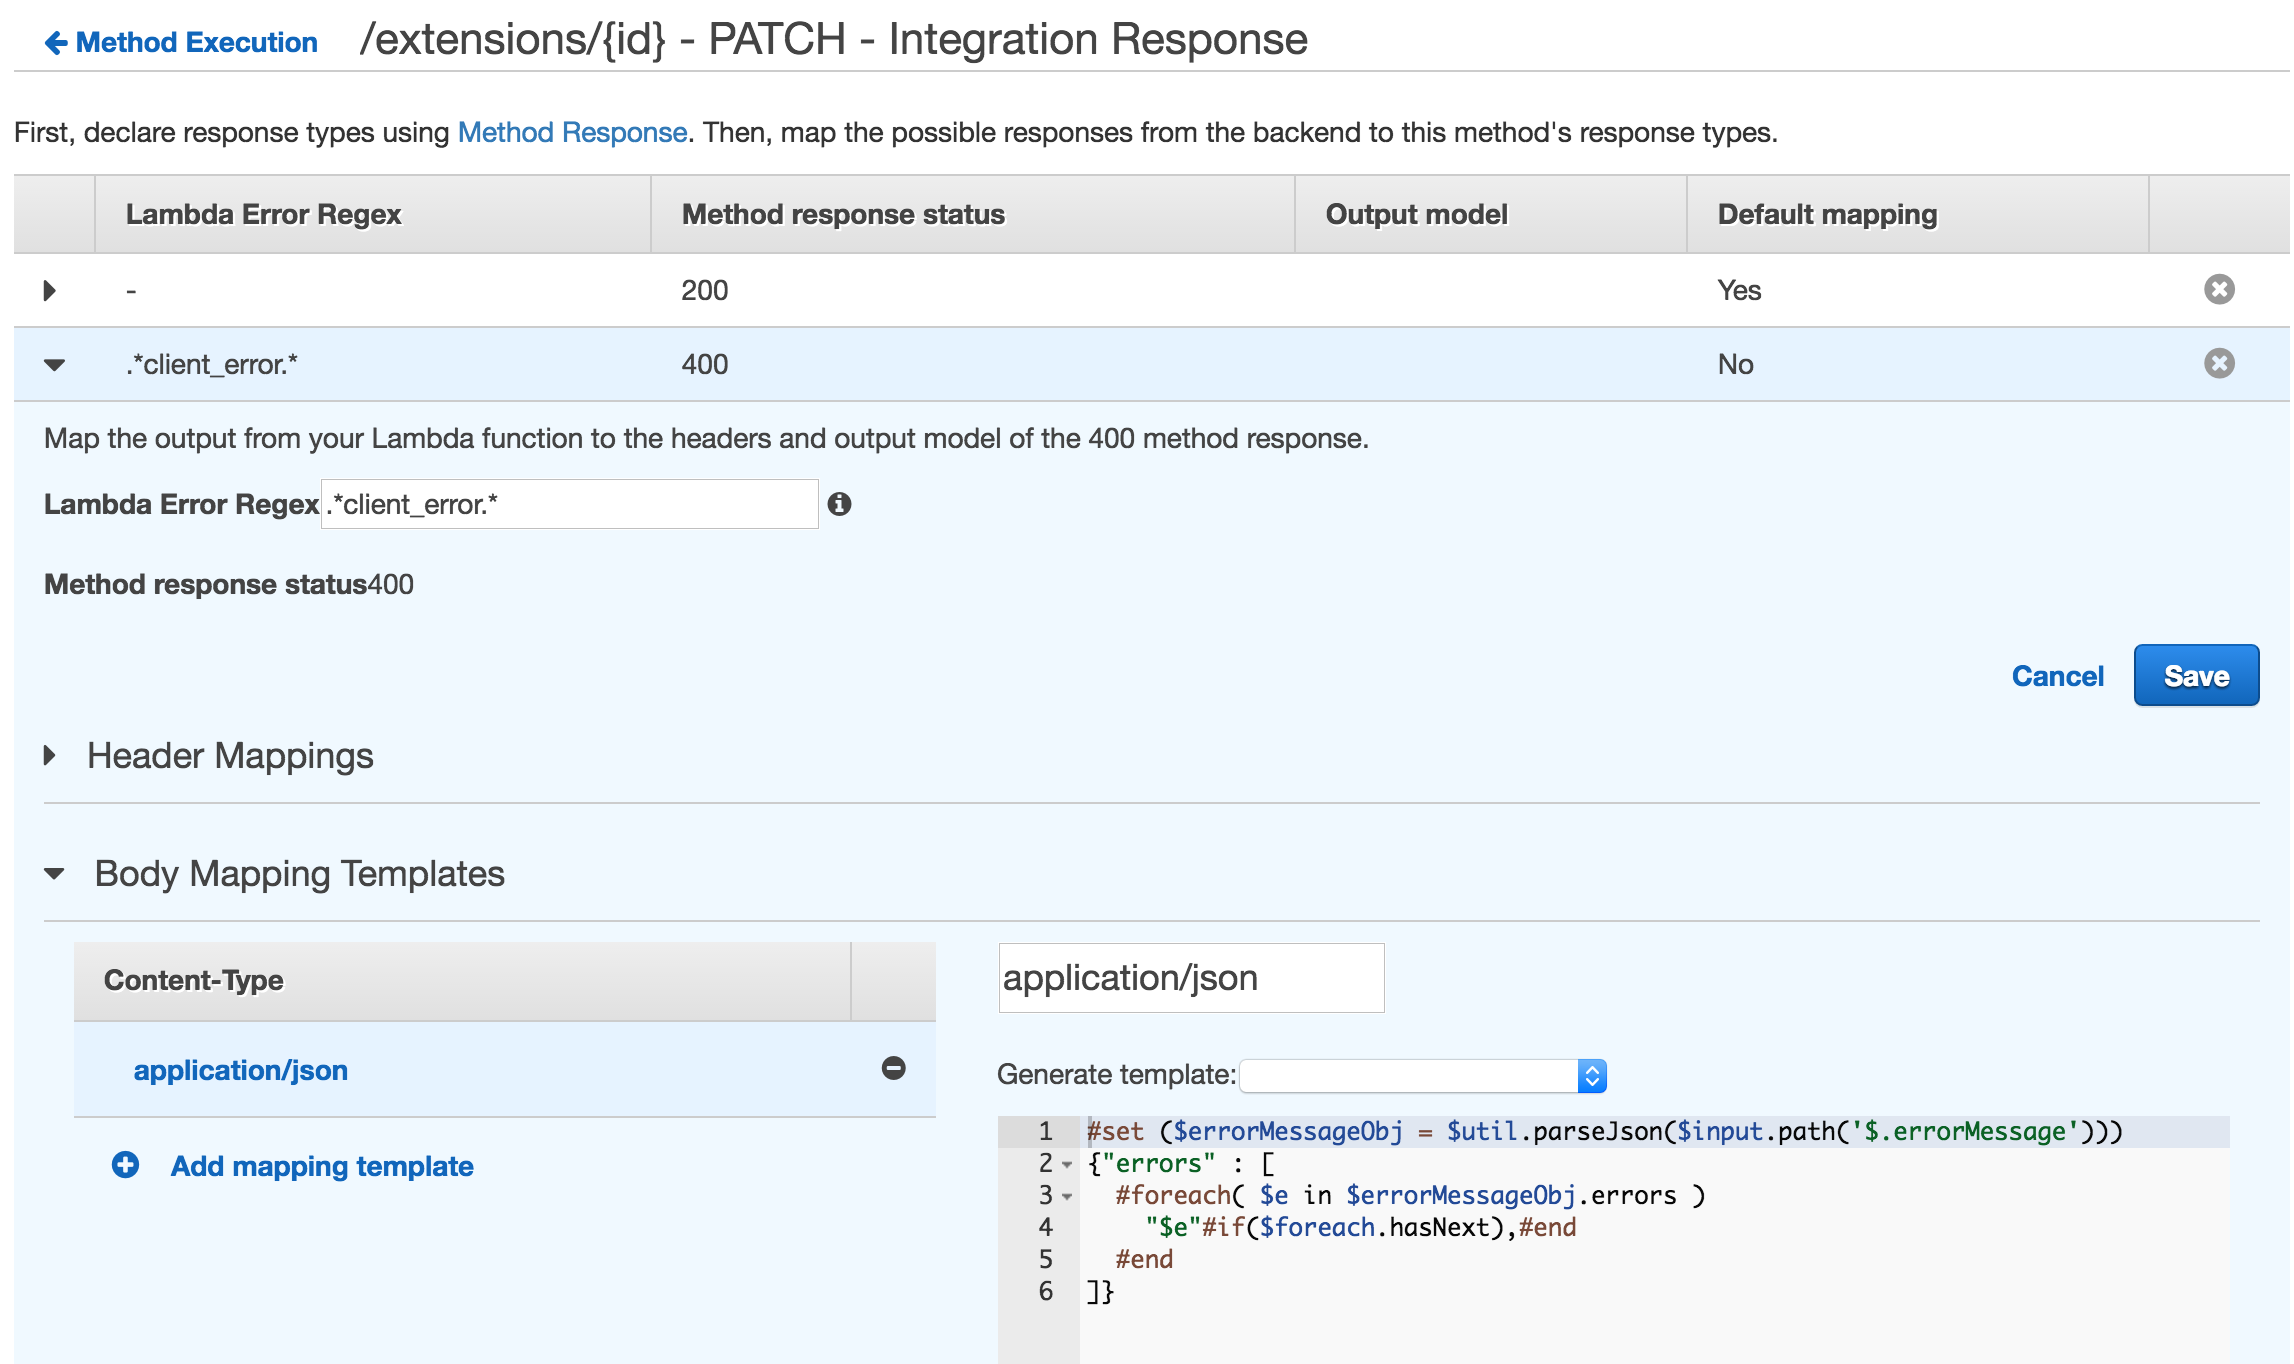 Amazon API Gateway integration response setup with several custom http status codes and mapping template